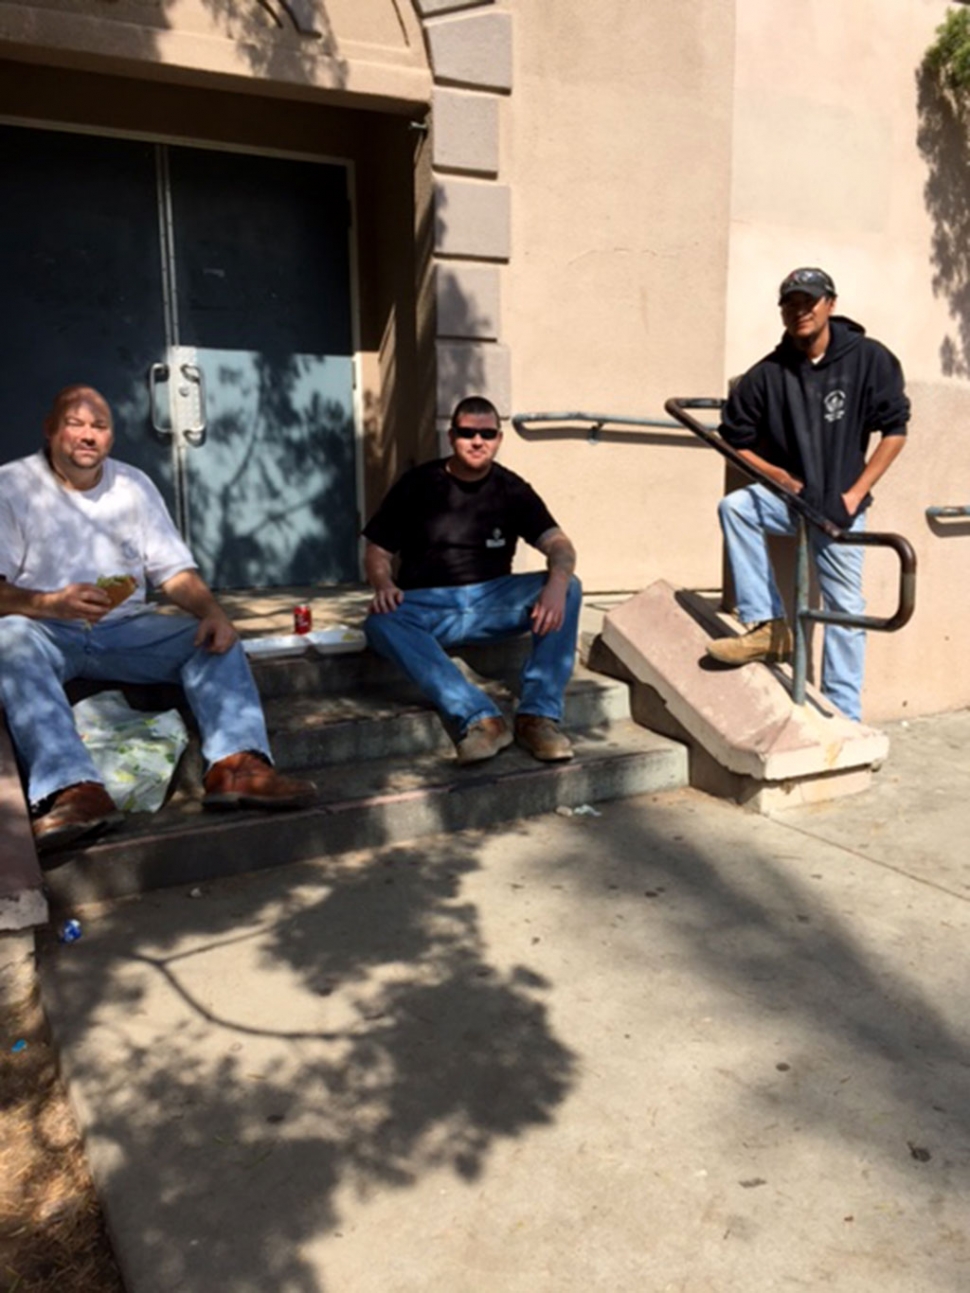 Jeff Bode, Chris Houston and Rene Guzman taking a lunch break. They are donating their time to help with the new Teen Study Center.